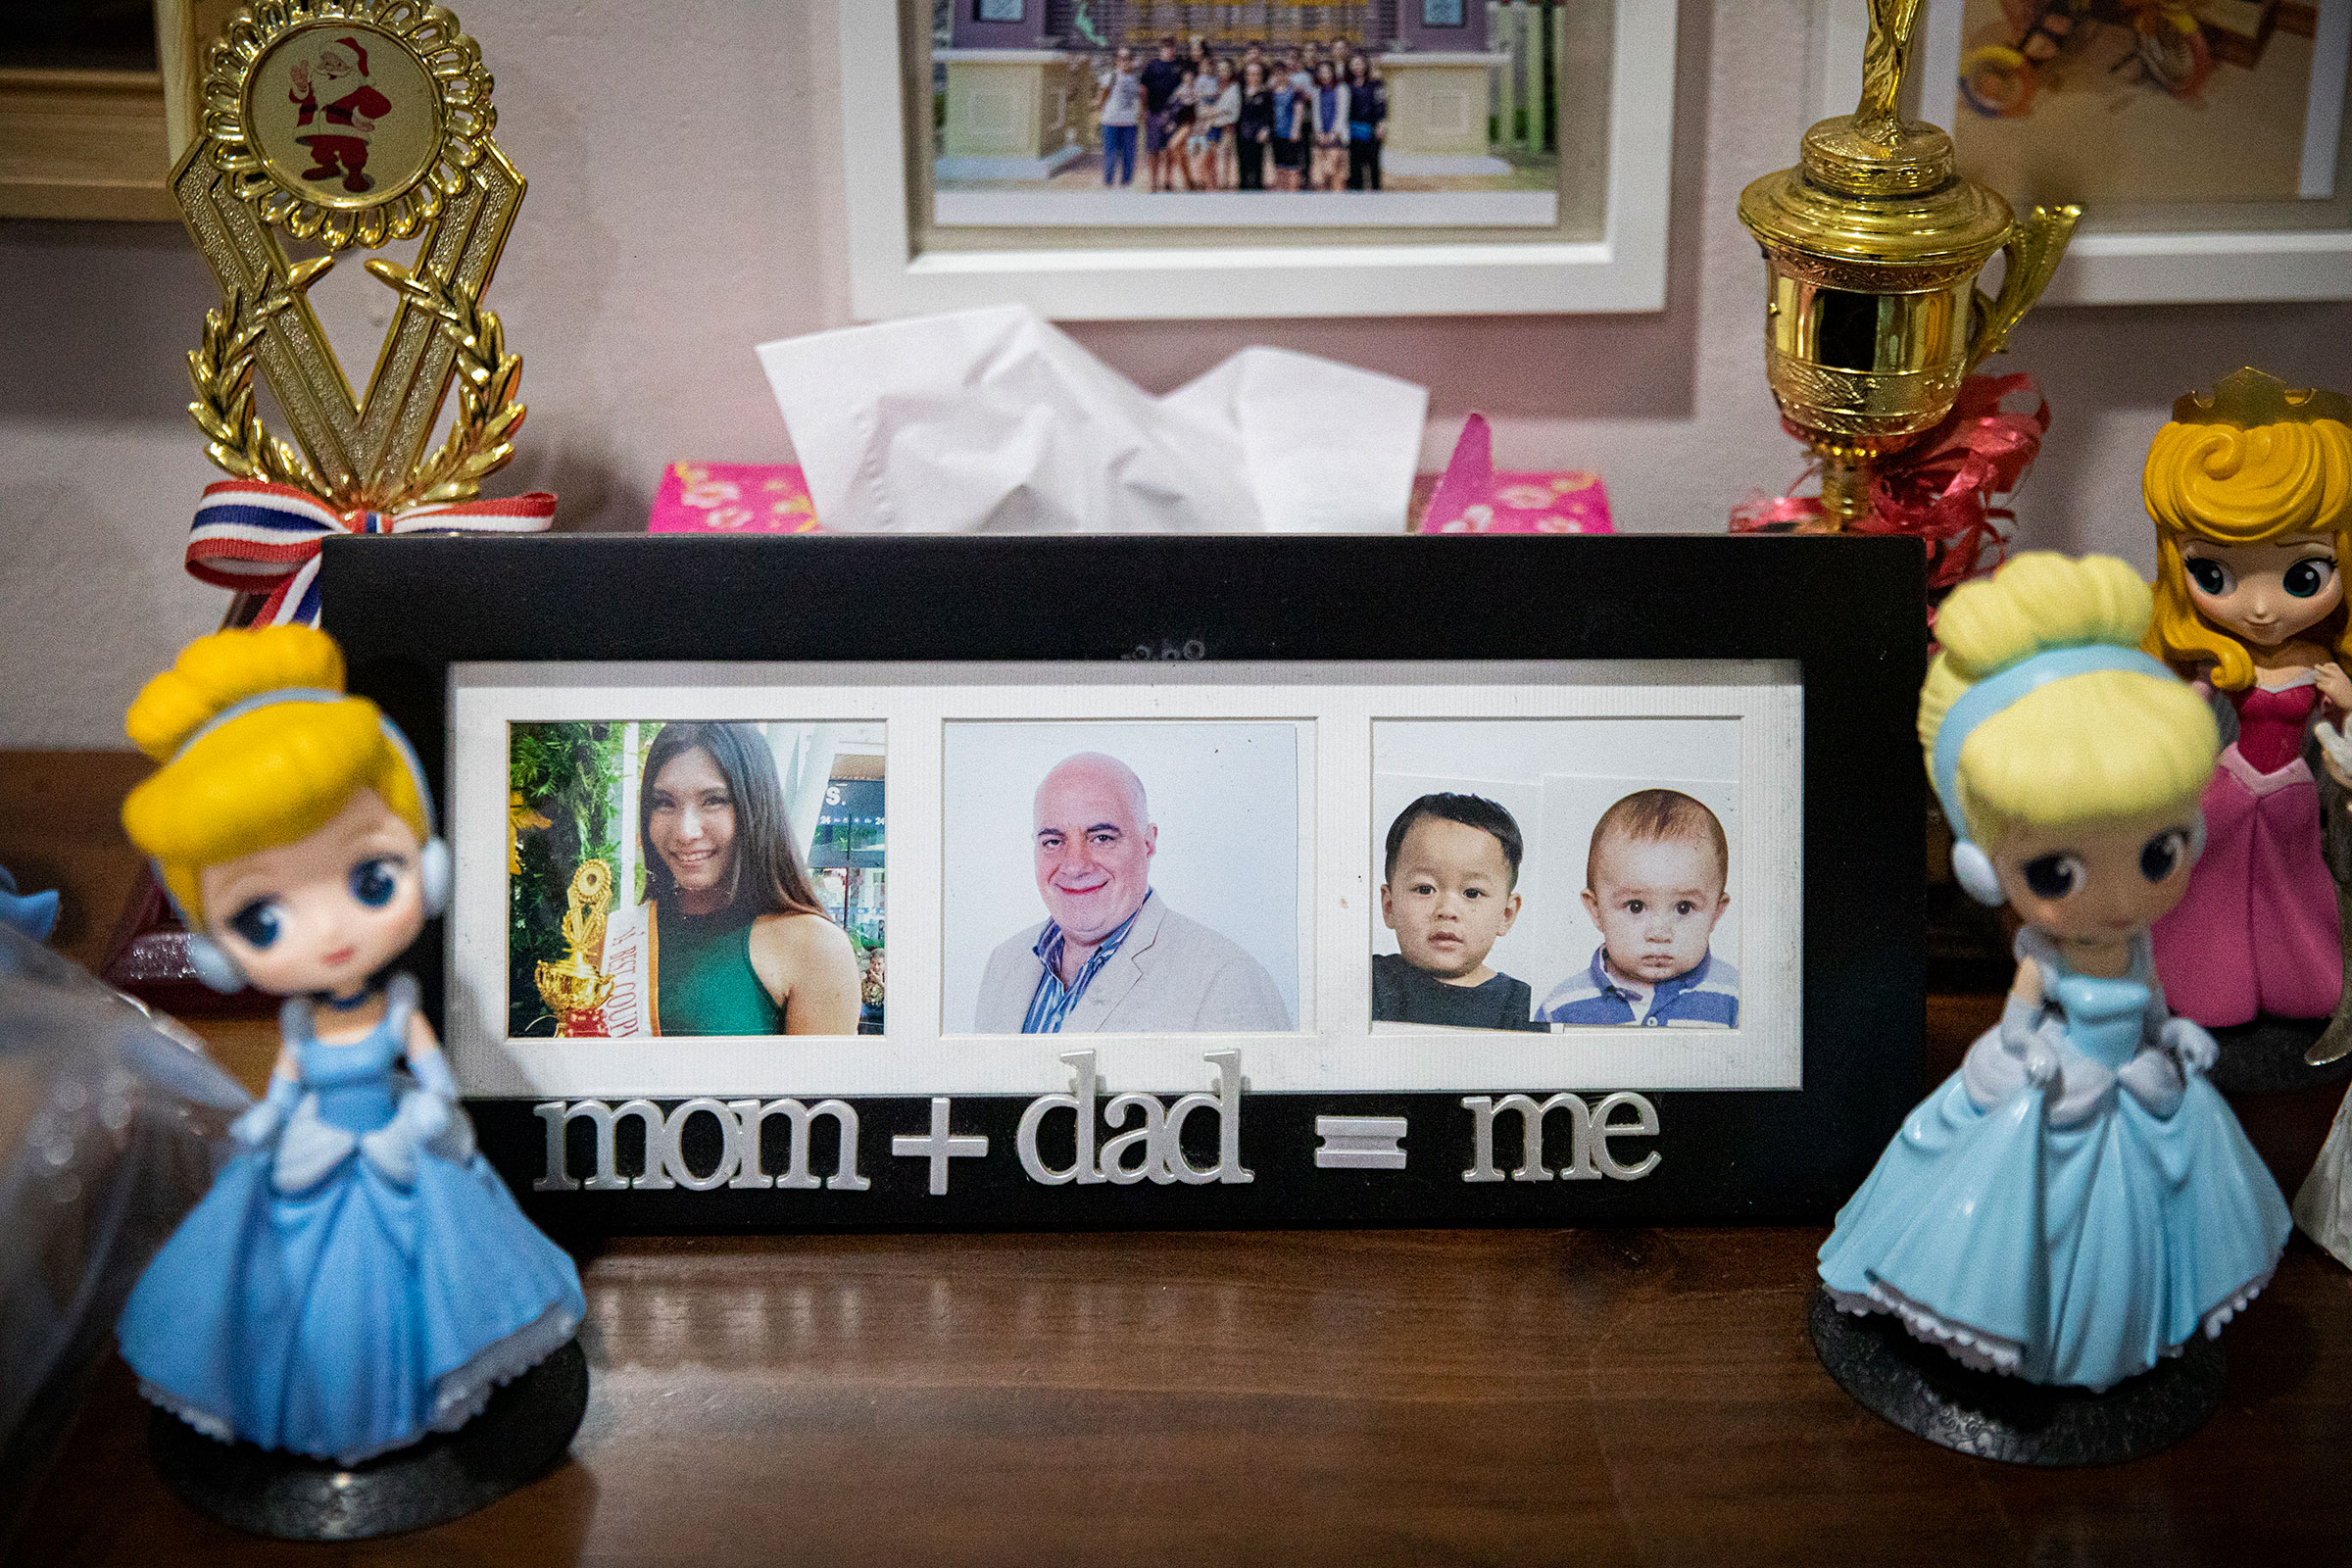 A frame with family photos showing Gina, Lee and their children. (Lauren DeCicca for TIME)